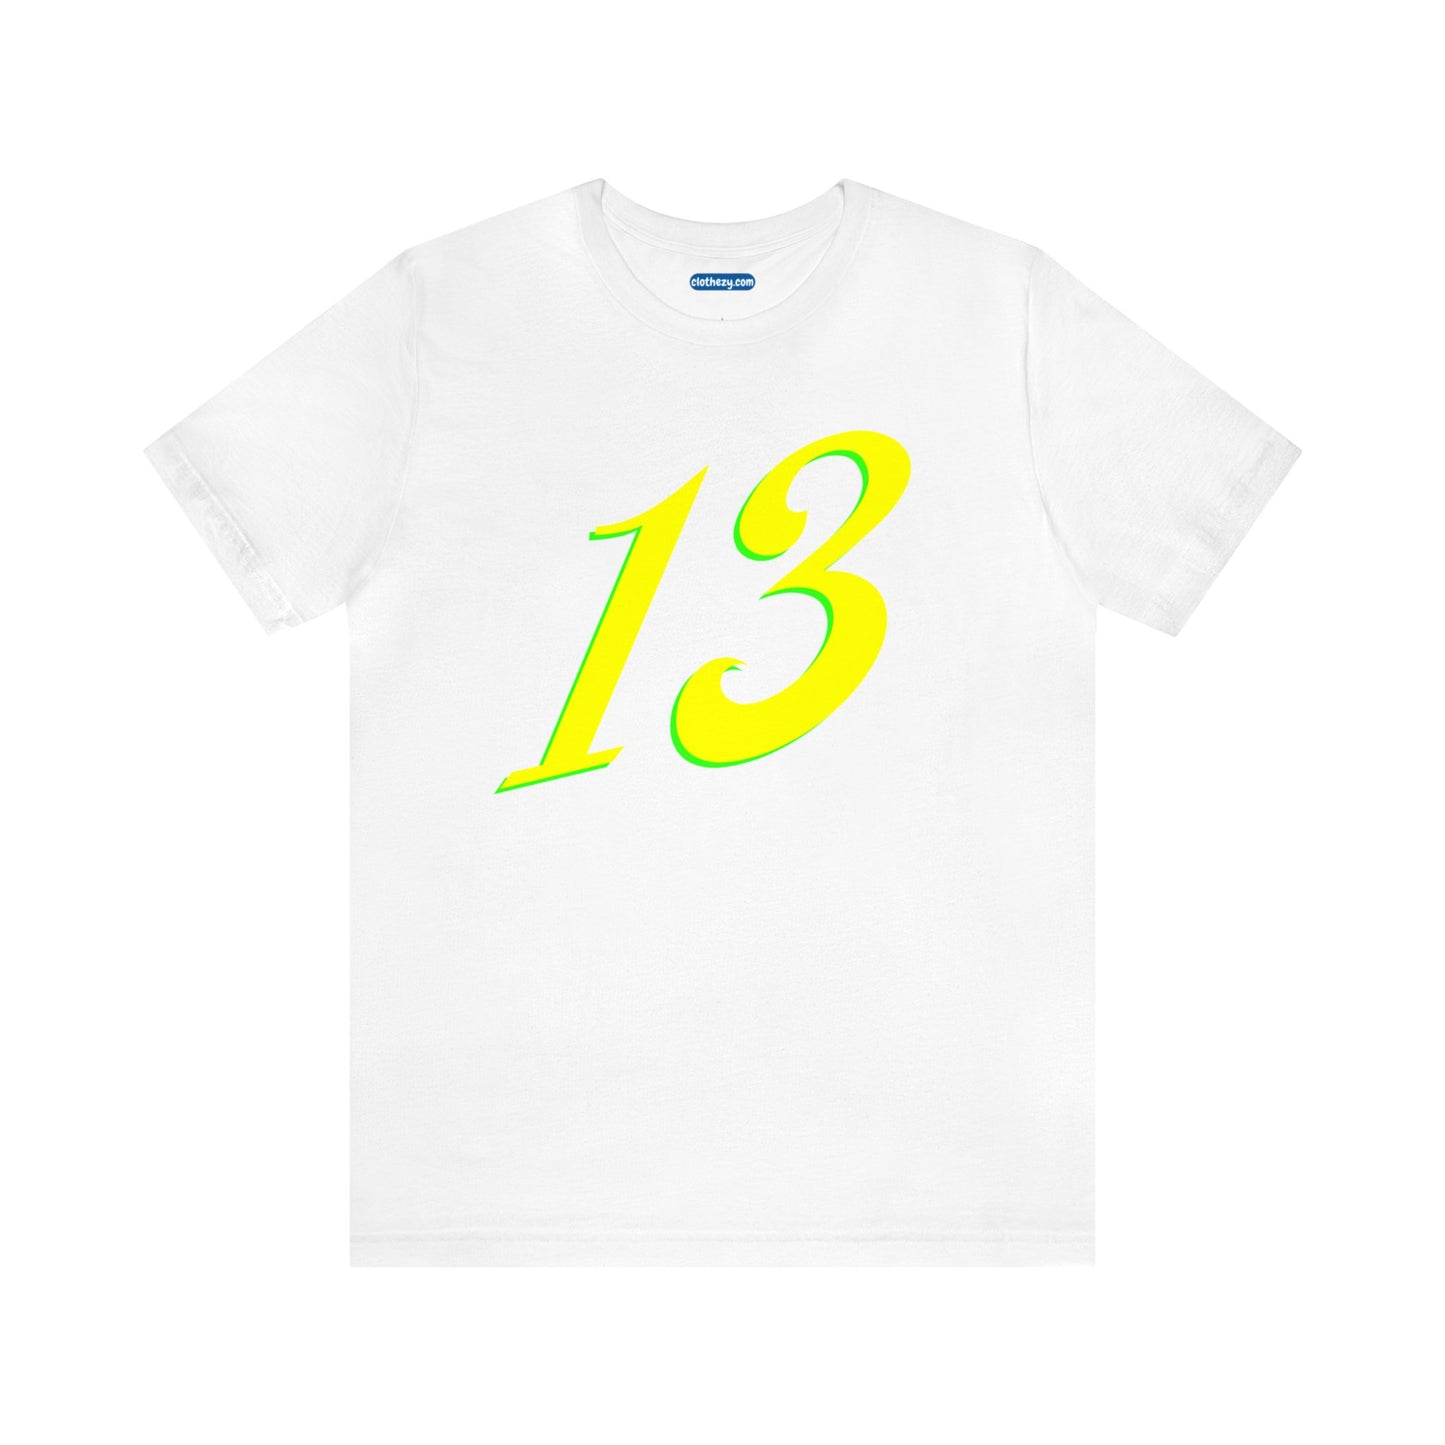 Number 13 Design - Soft Cotton Tee for birthdays and celebrations, Gift for friends and family, Multiple Options by clothezy.com in White Size Small - Buy Now